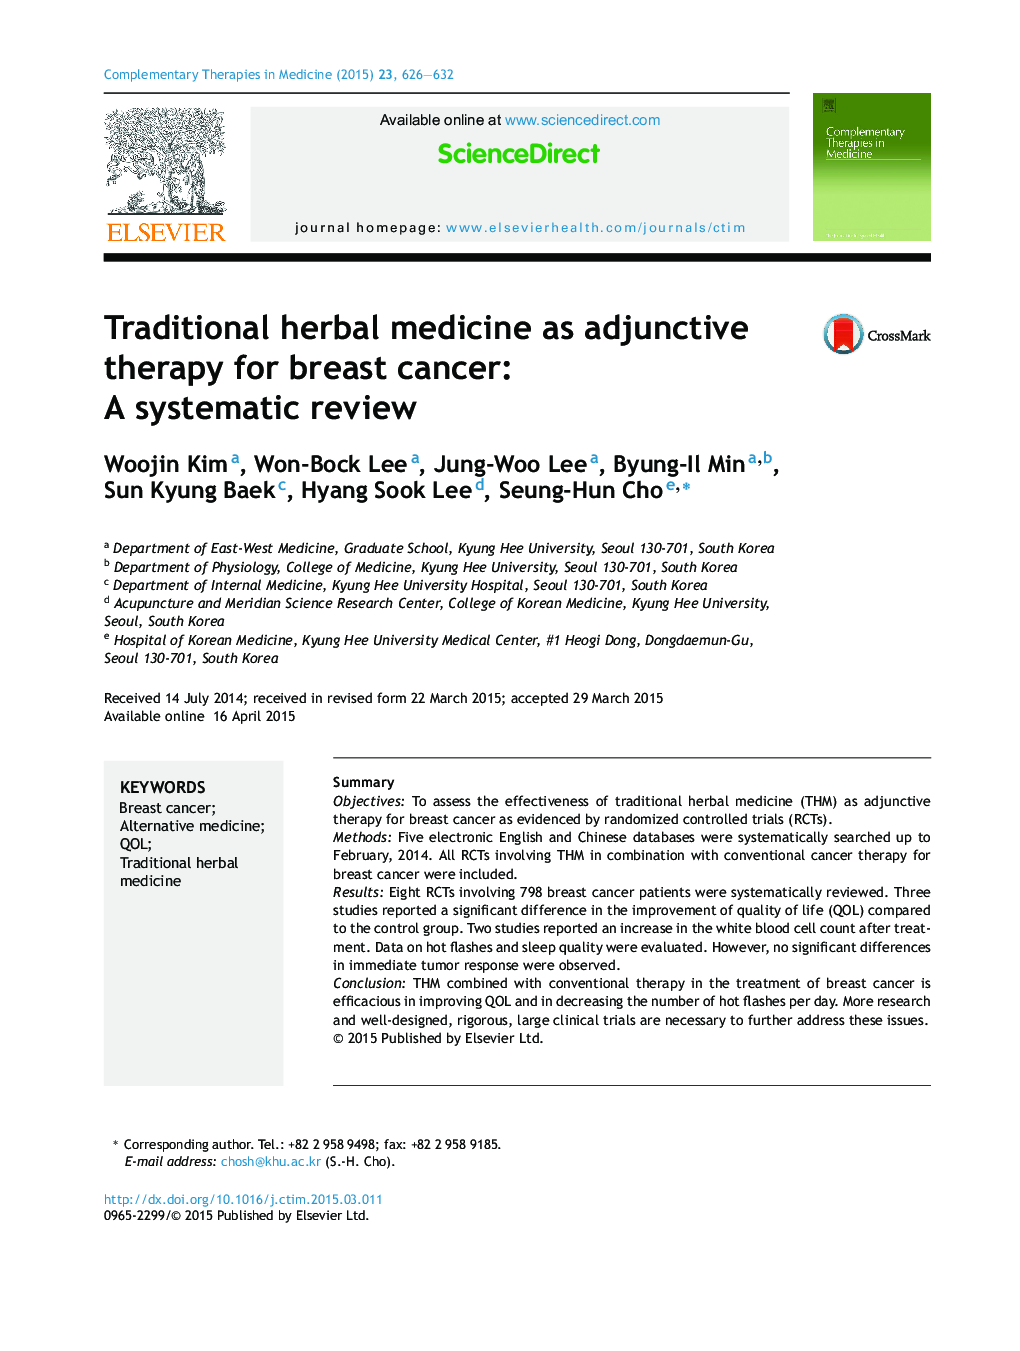 Traditional herbal medicine as adjunctive therapy for breast cancer: A systematic review